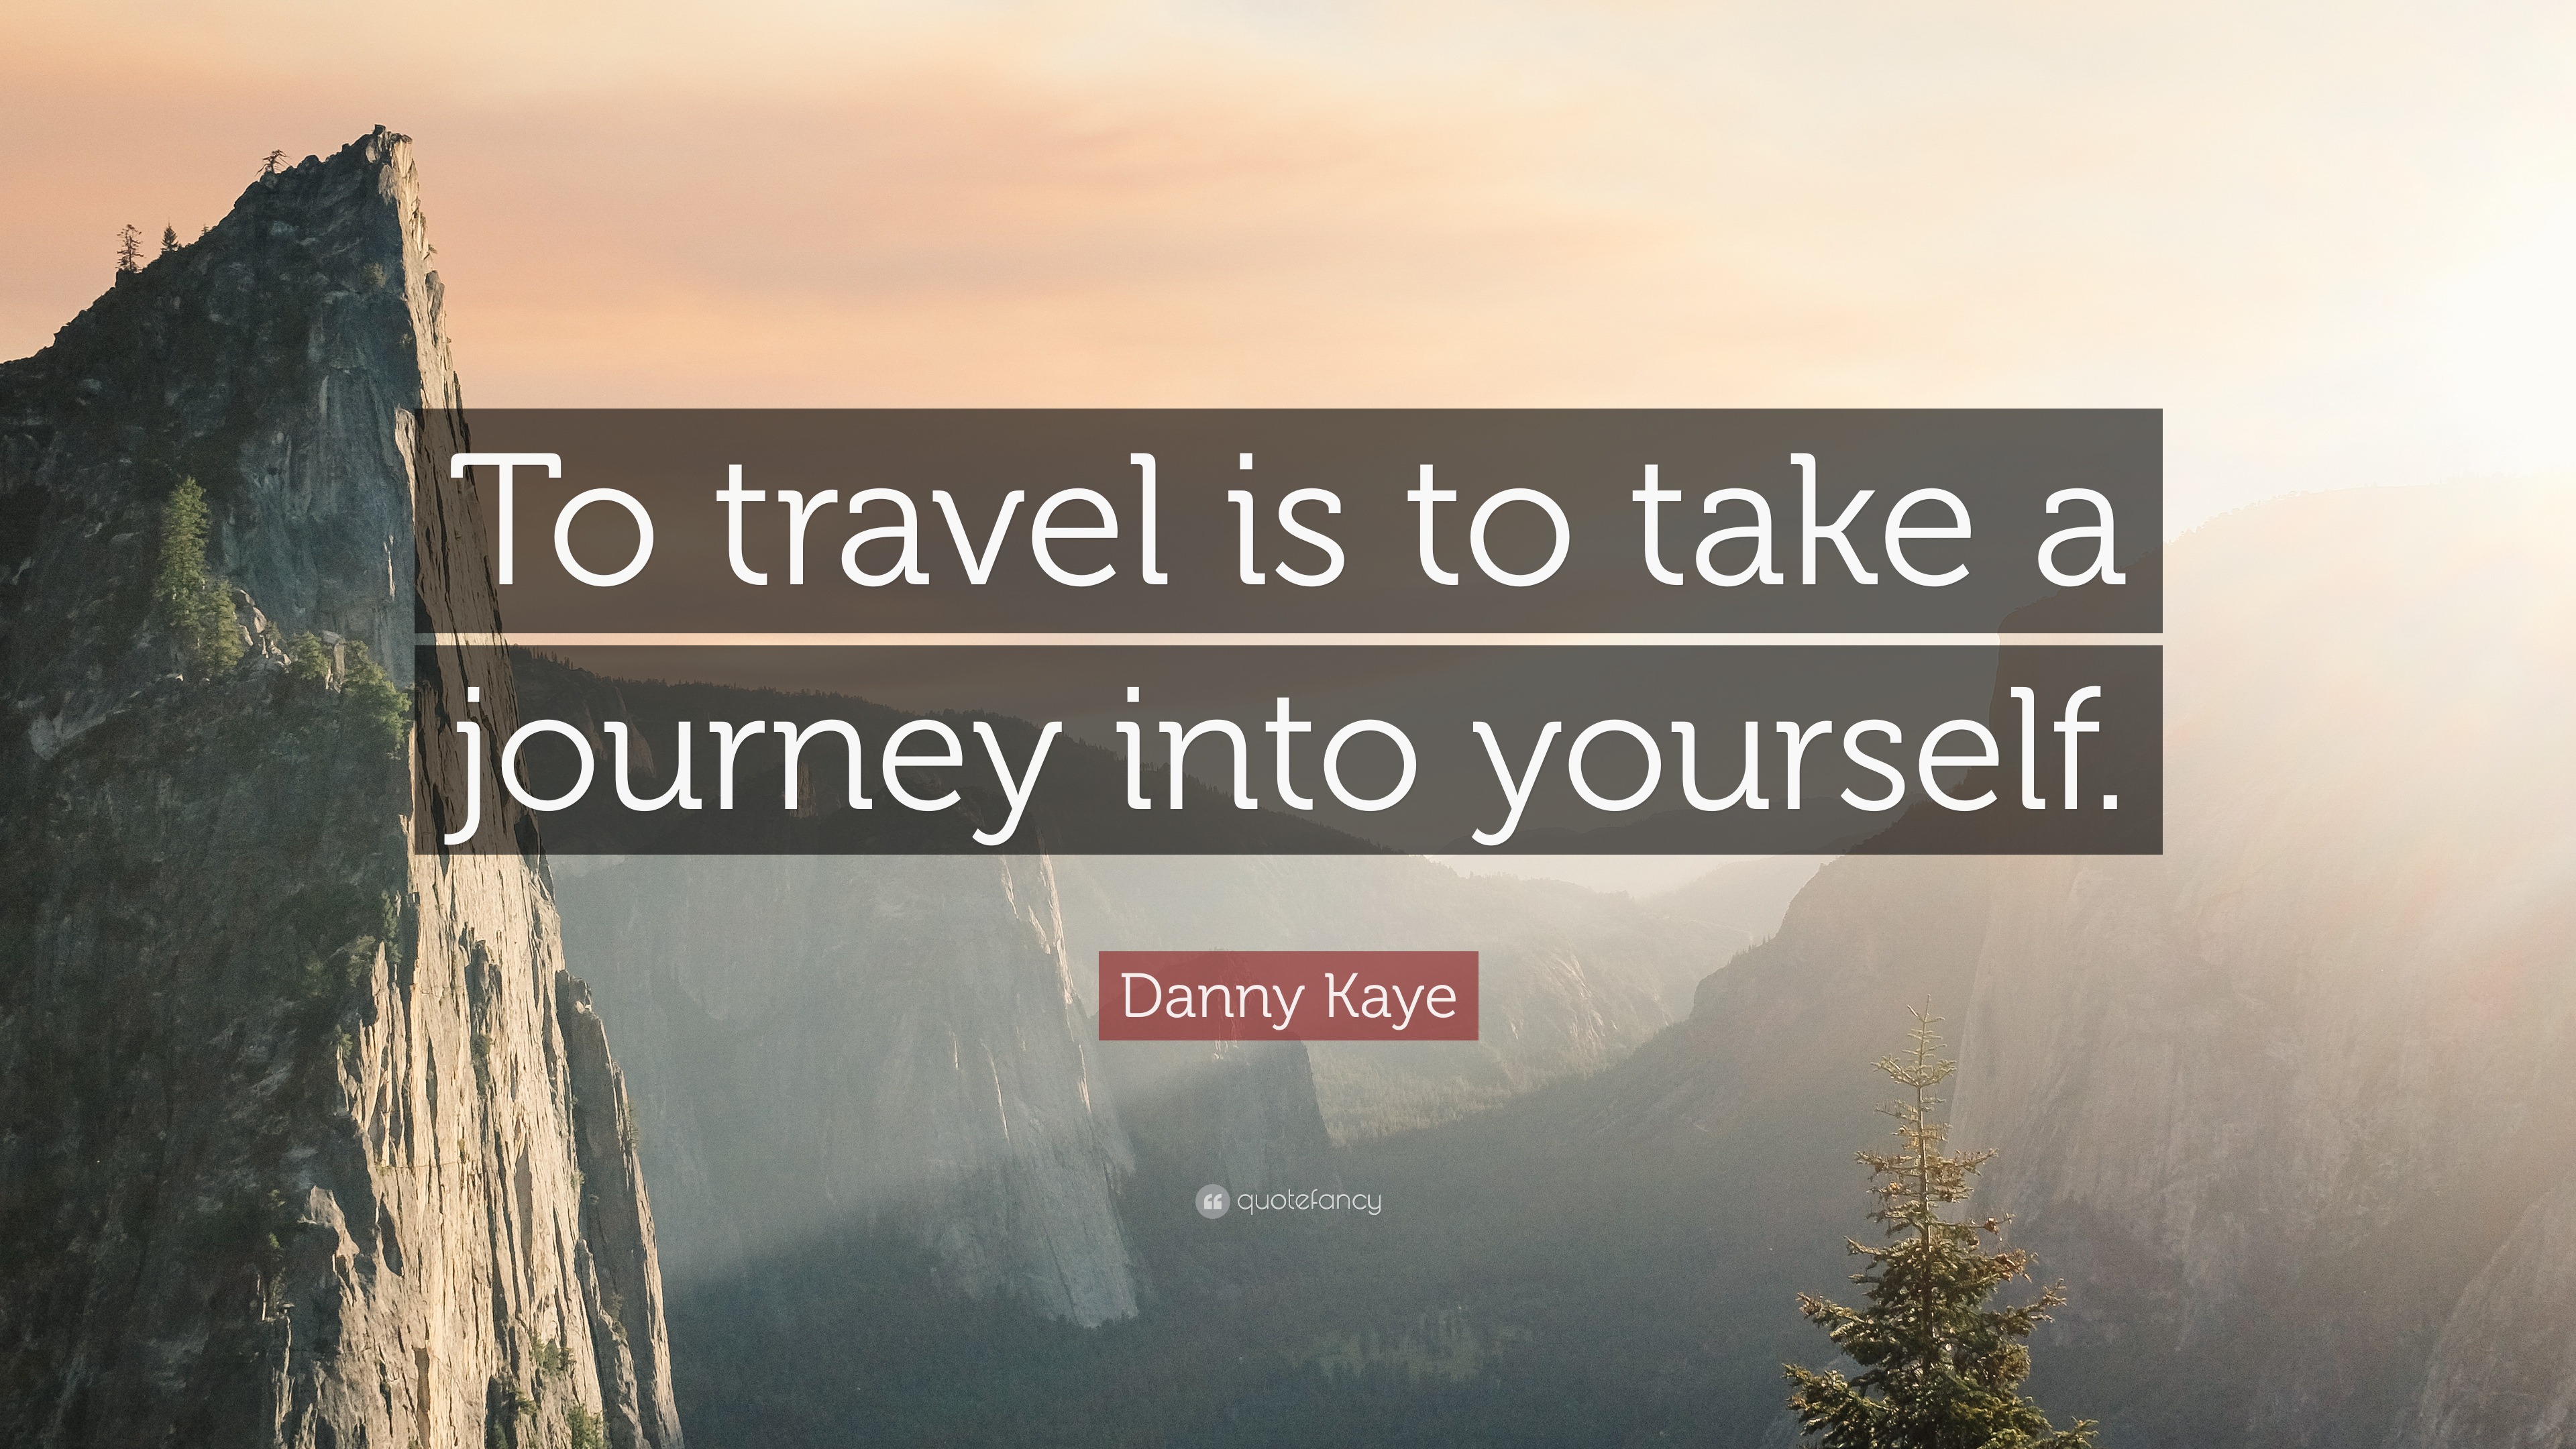 travel is to take a journey into yourself